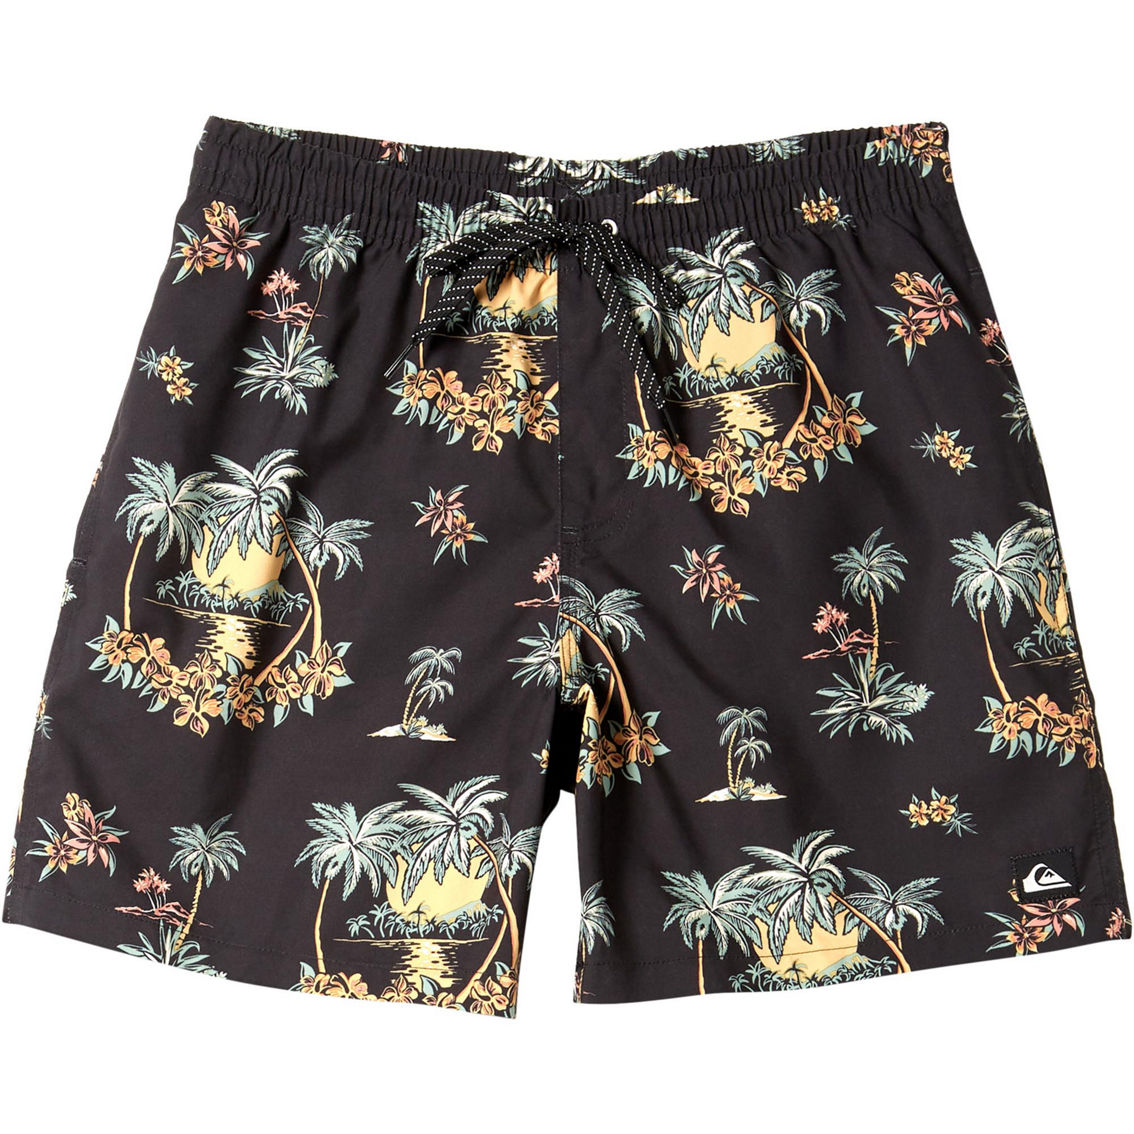 Quiksilver Everyday Mix 17 in. Volley Swim Shorts - Image 5 of 6